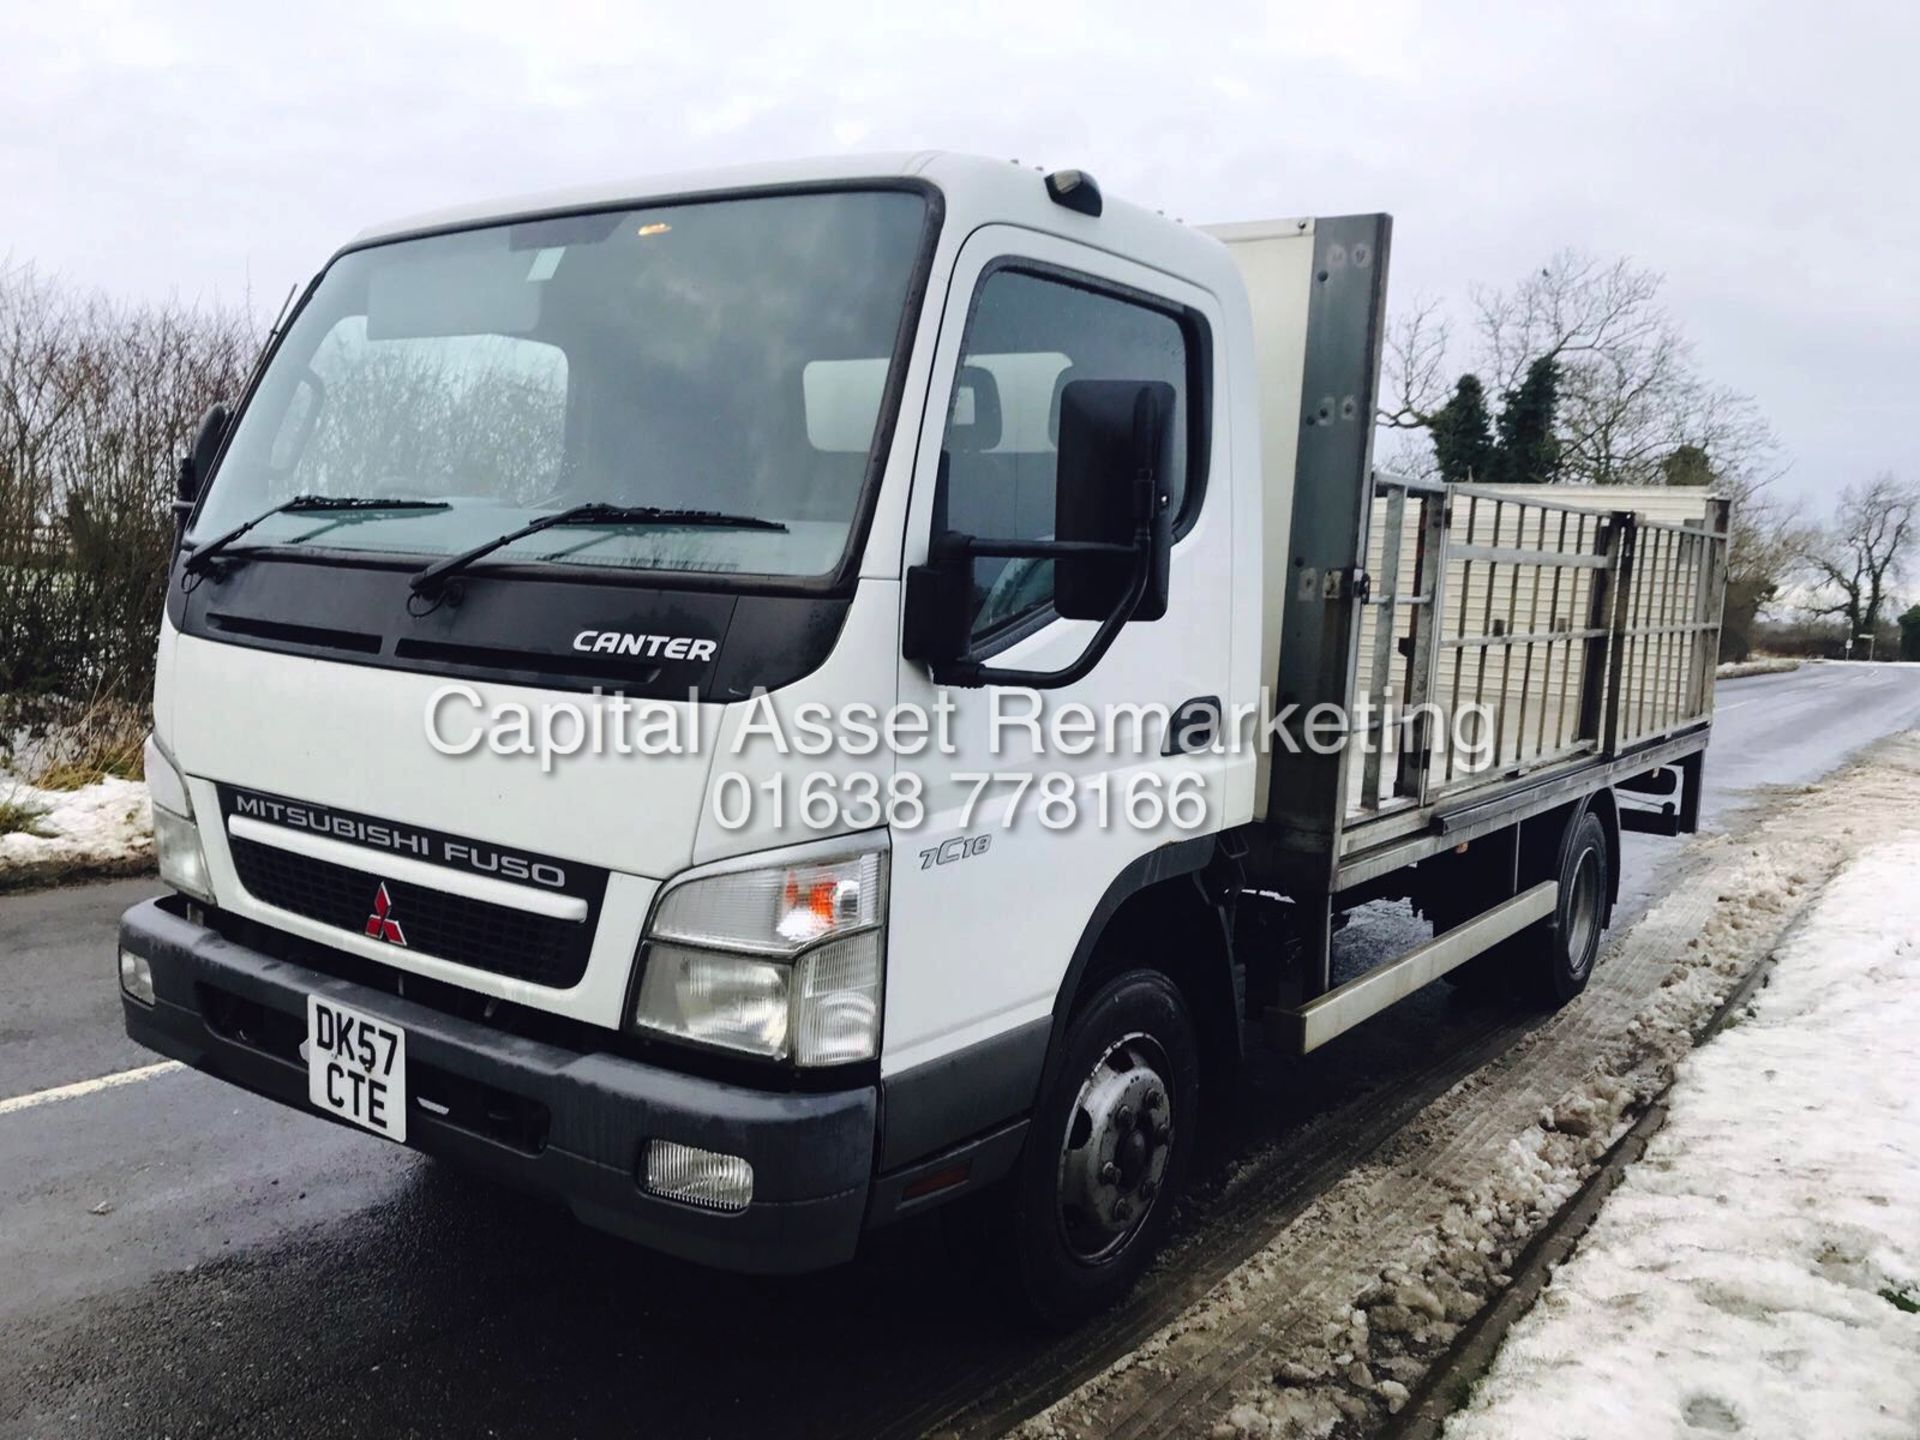 (ON SALE) MITSUBISHI FUSO CANTER 7C18 (2008 MODEL) 15FT LWB ***1 OWNER - ONLY 40,000 MILES FSH*** - Image 3 of 14